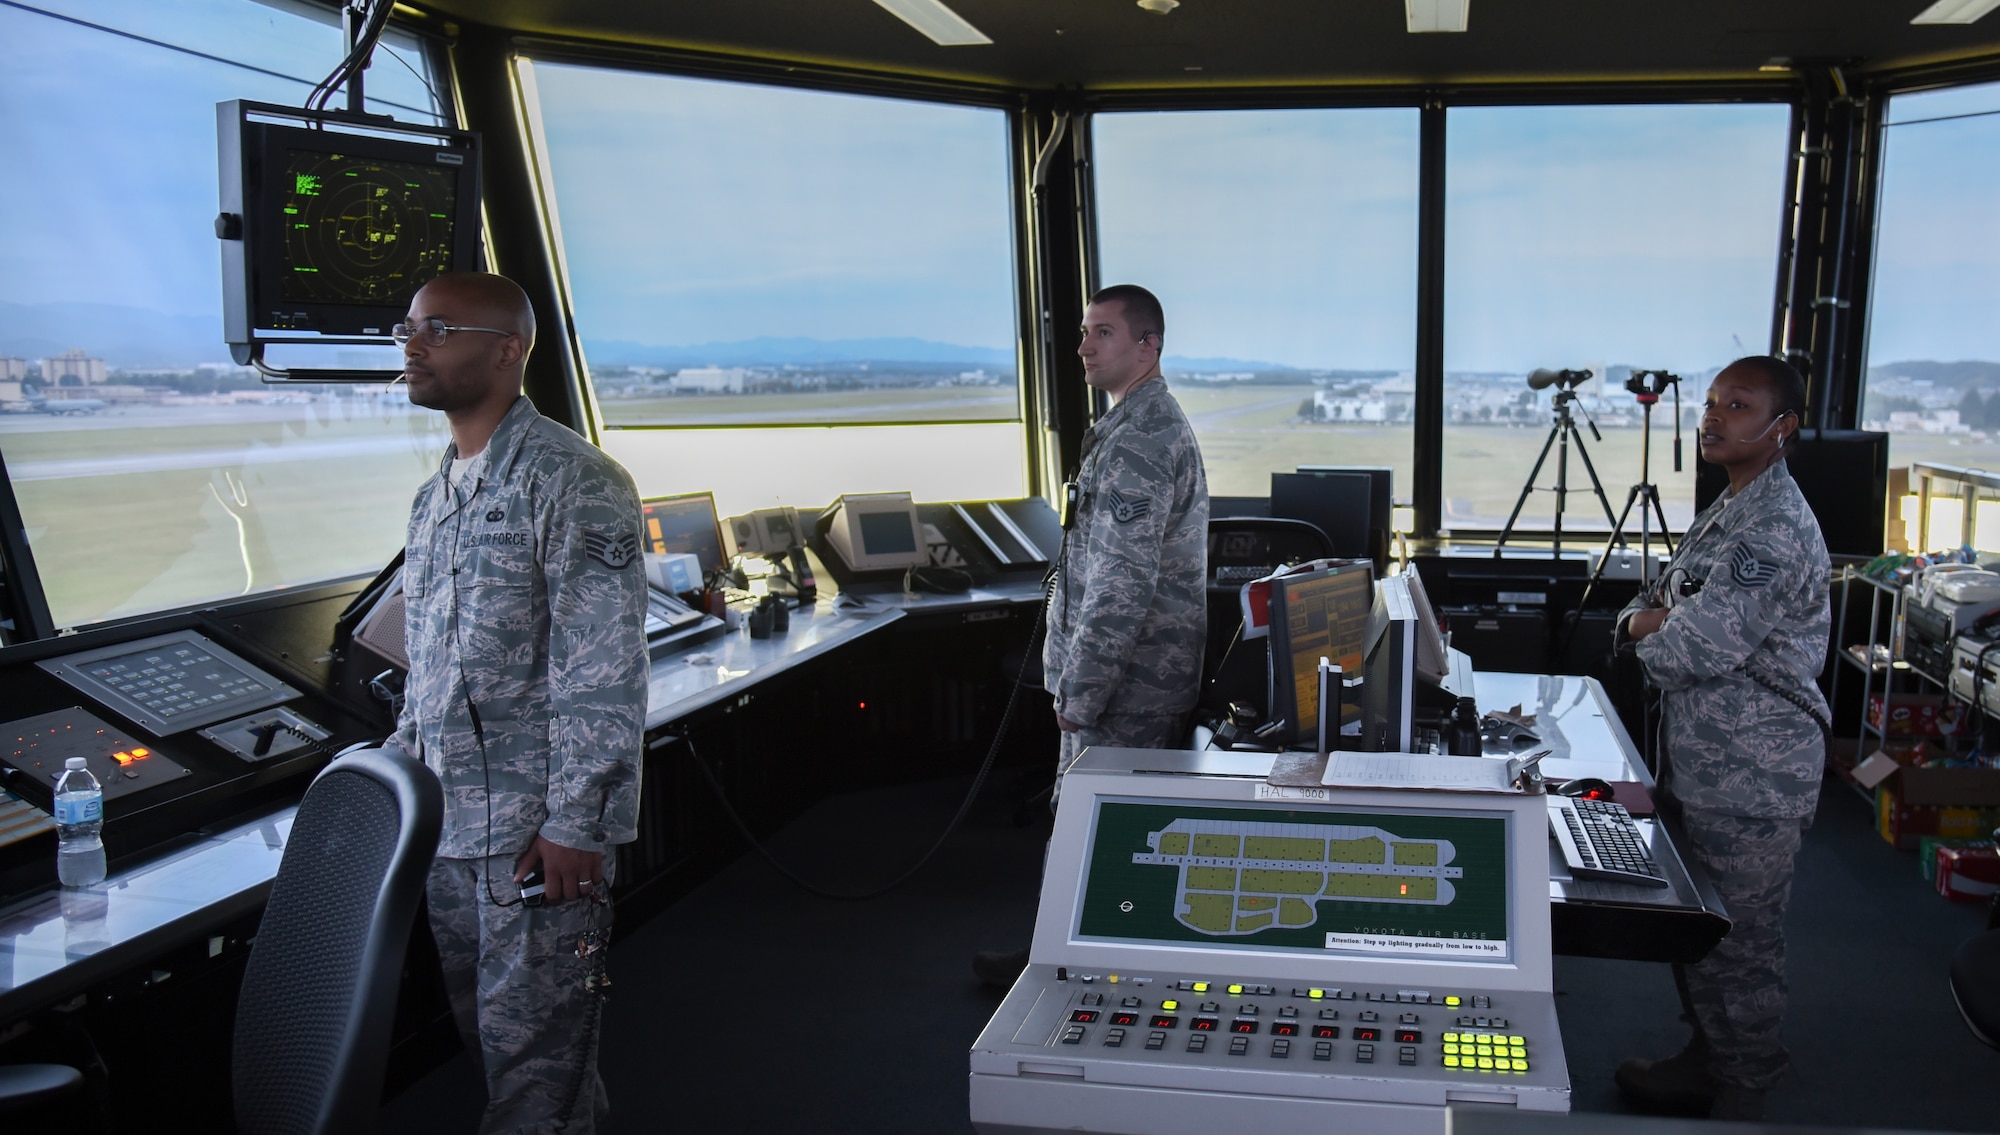 From left to right, Staff Sgts. Randall Vaughn, Johnathan Camp and Tech. Sgt. Charmaine Johnson, 374th Operations Support Squadron watch supervisors, work the tower cab section of the air traffic control tower at Yokota Air Base, Japan, May 8, 2015. The tower cab can handle aircraft within five nautical miles. (U.S. Air Force photo by Senior Airman Michael Washburn/Released)  